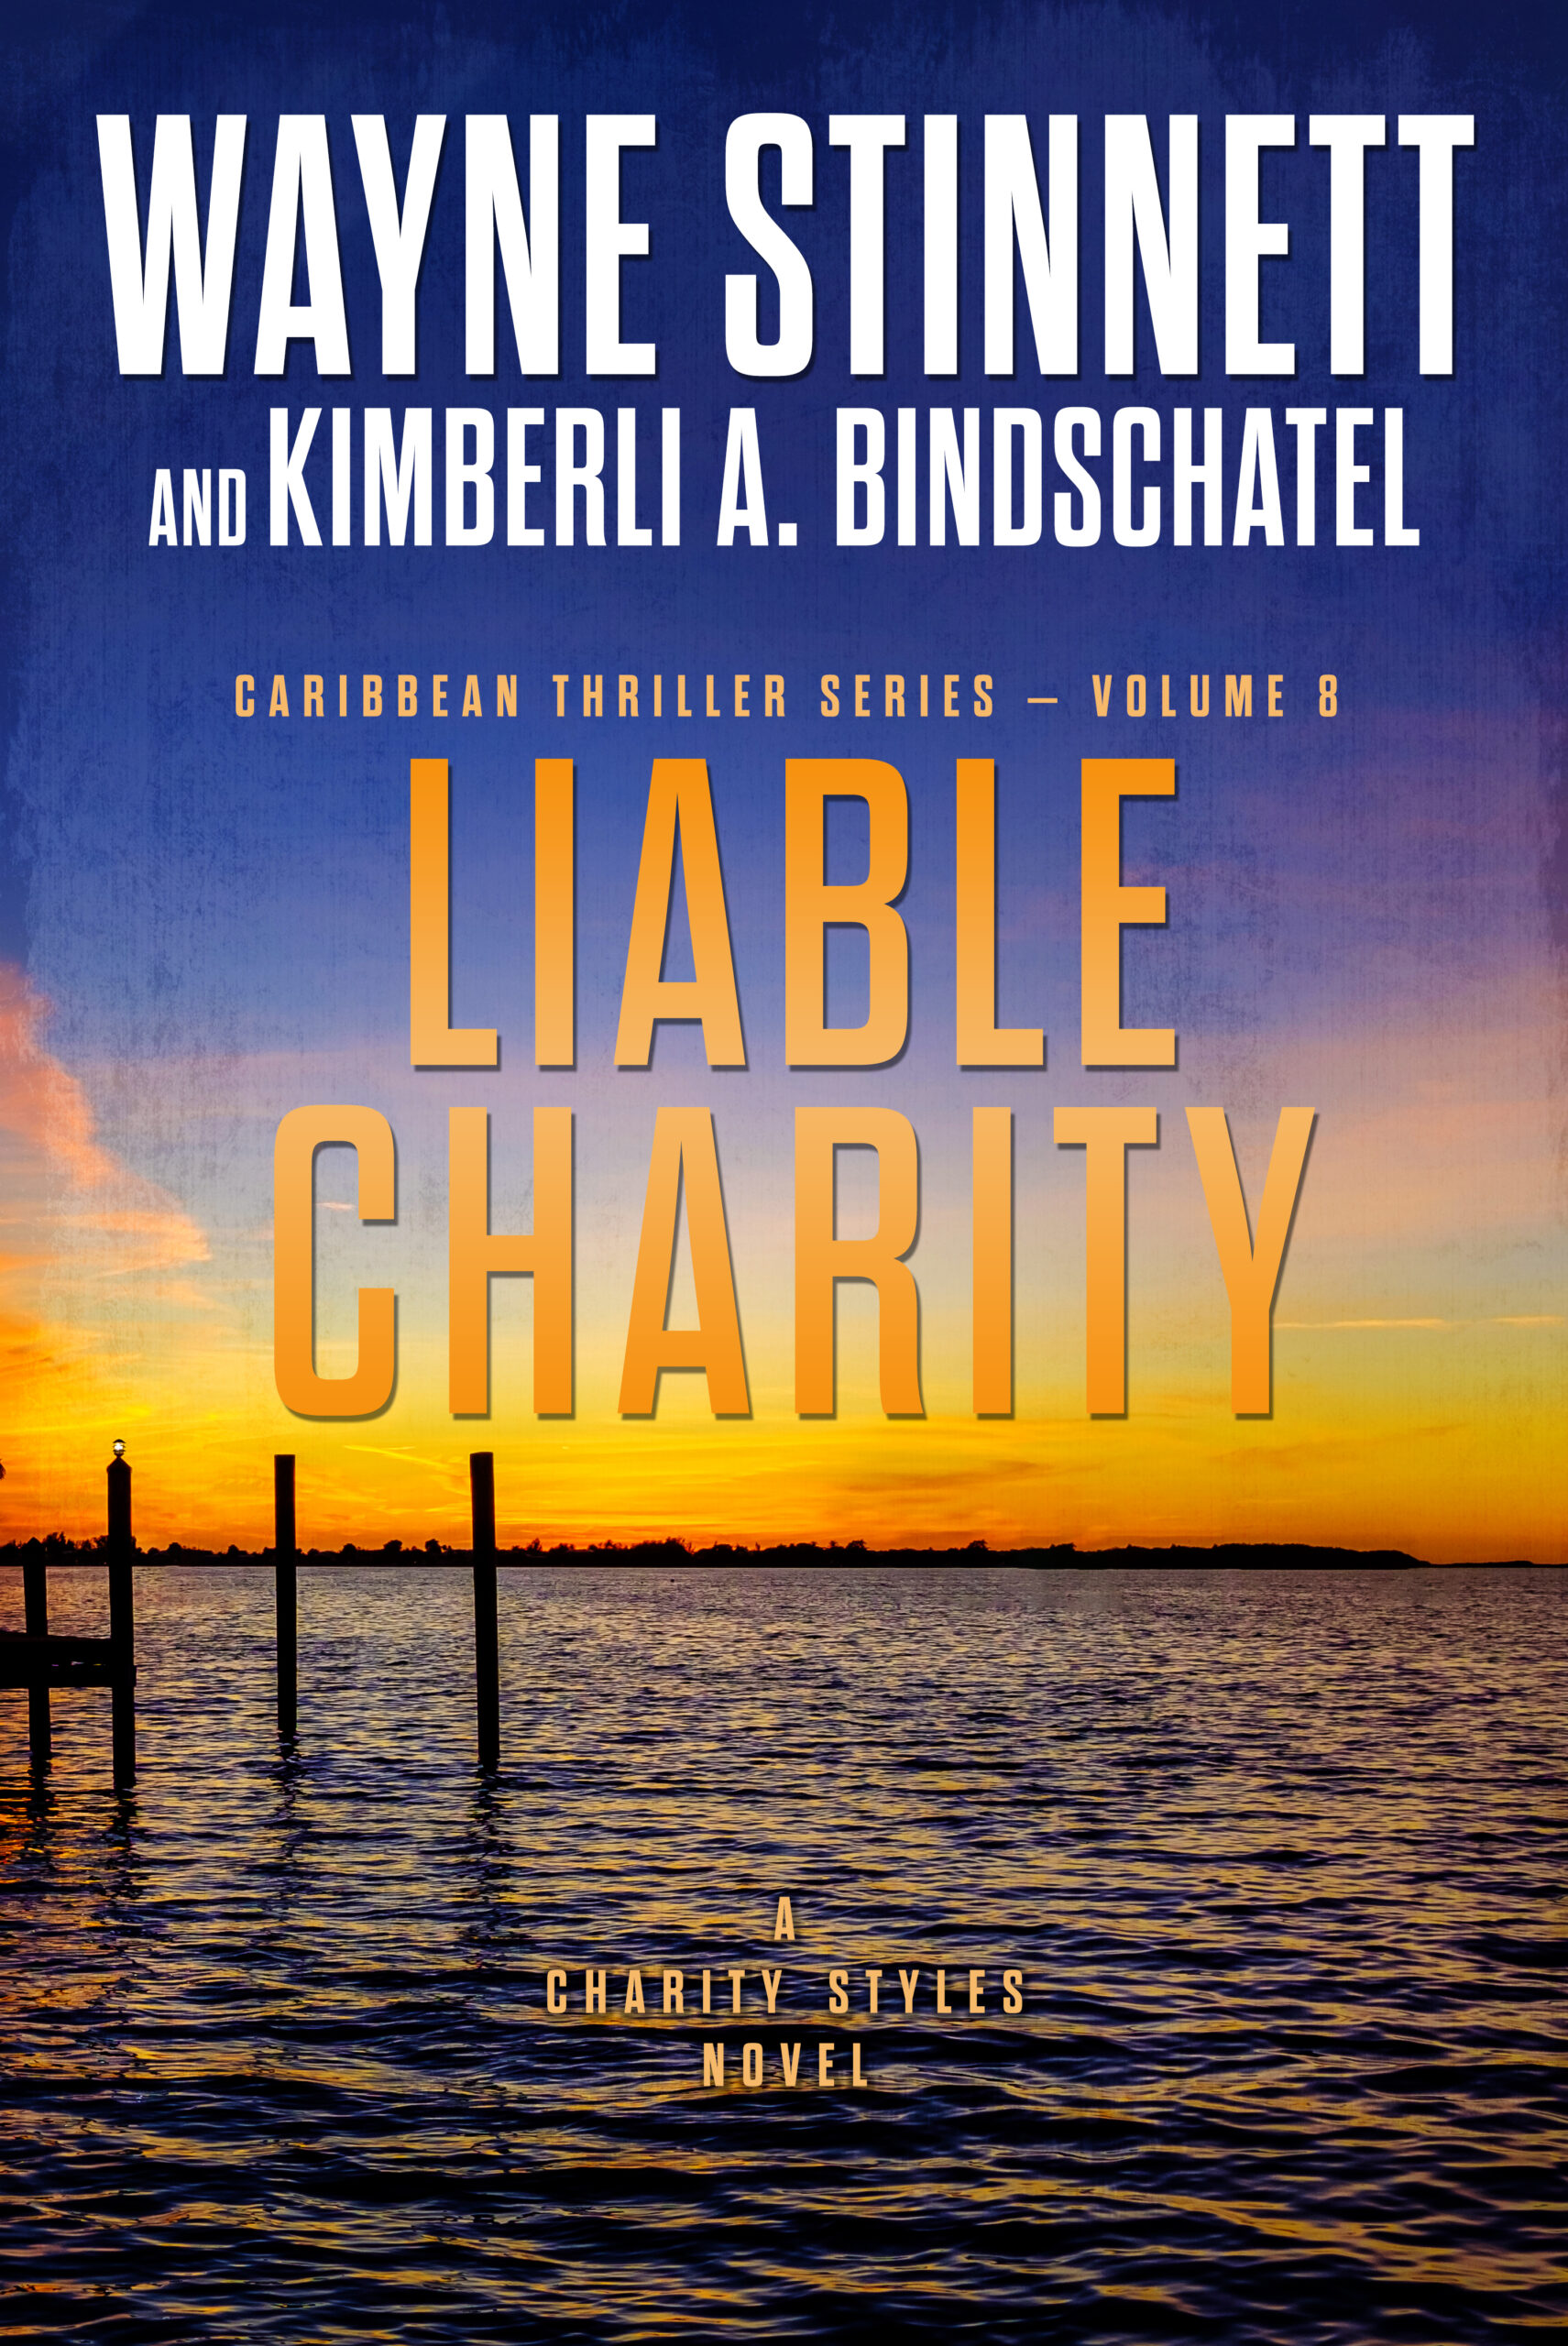 Book Cover of Liable Charity by Wayne Stinnett